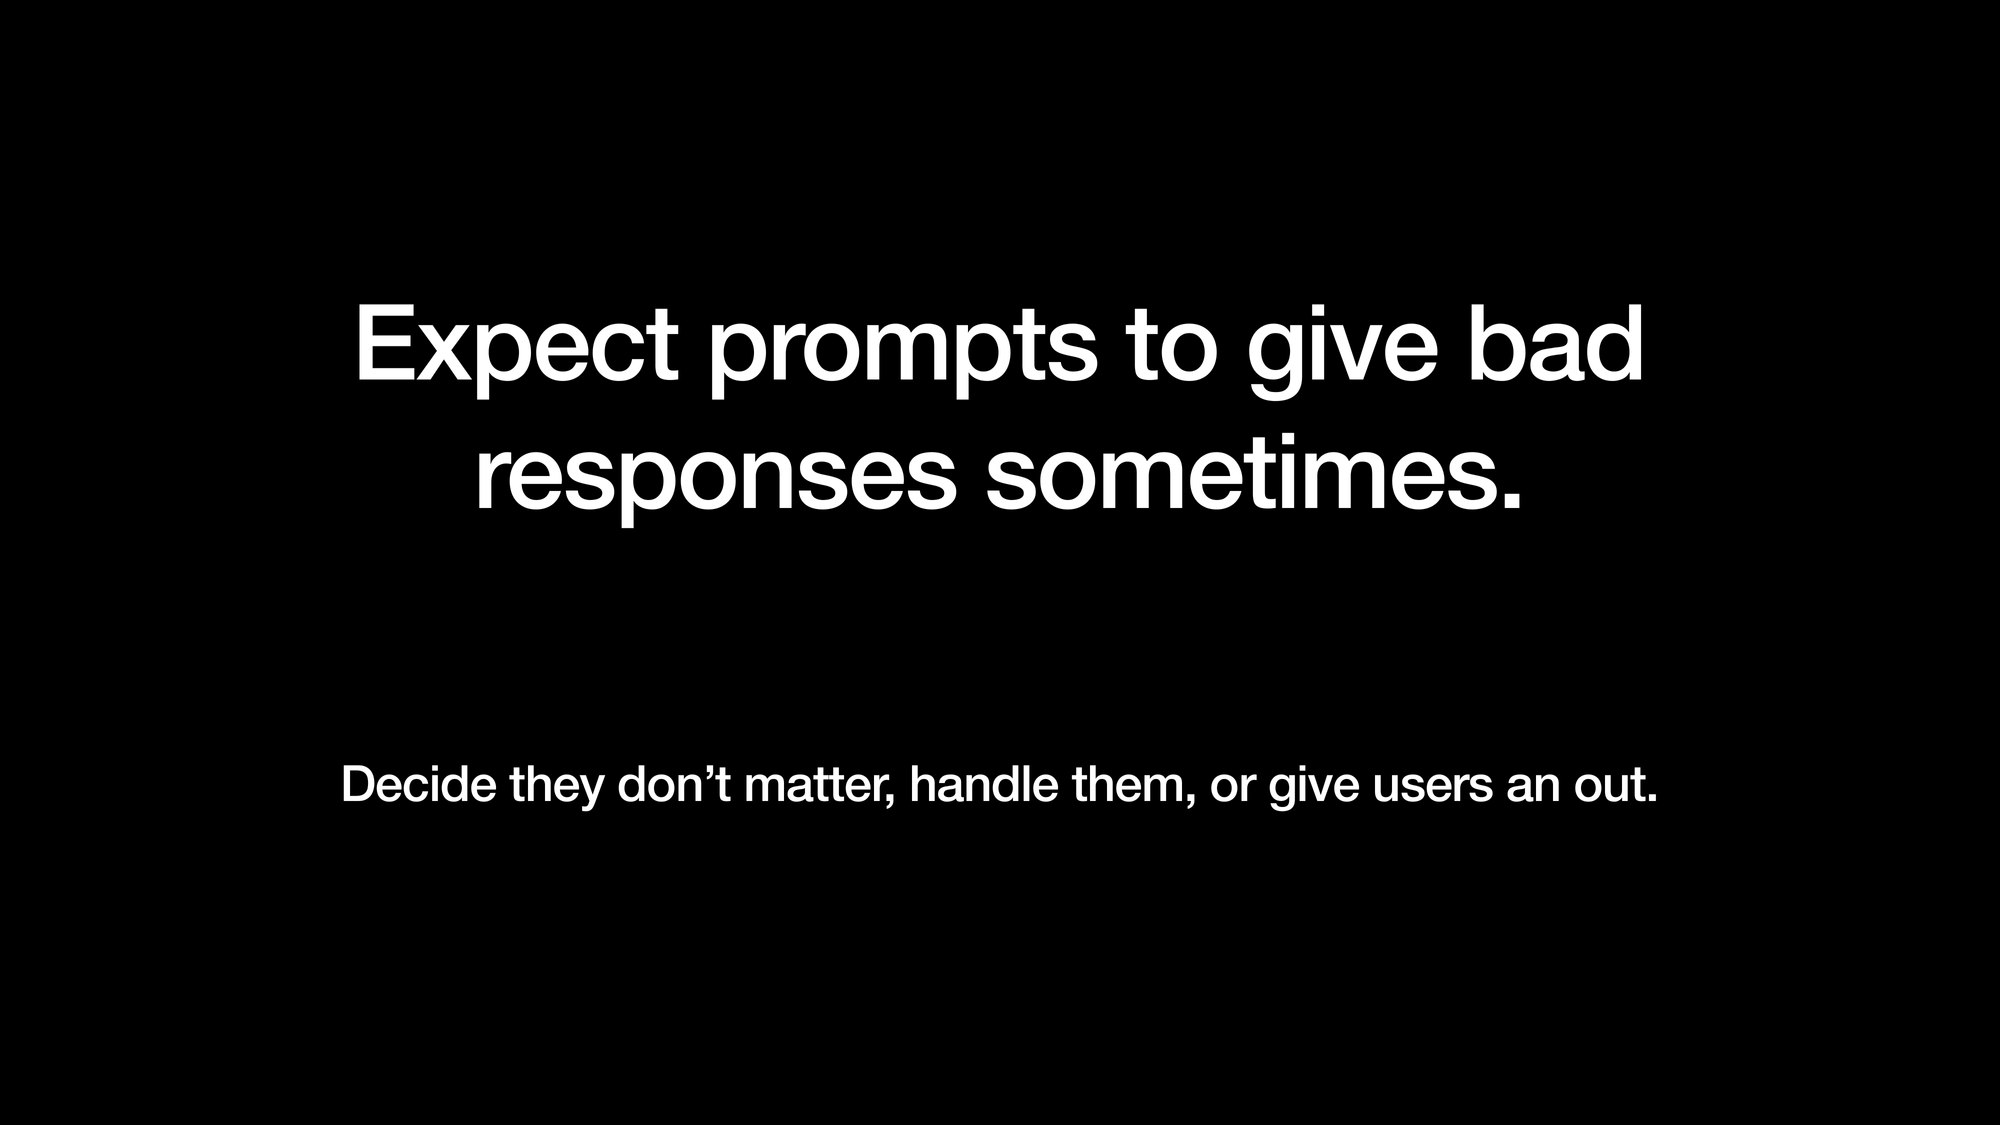 Expect prompts to give bad responses sometimes. Decide they don’t matter, handle them, or give users an out.